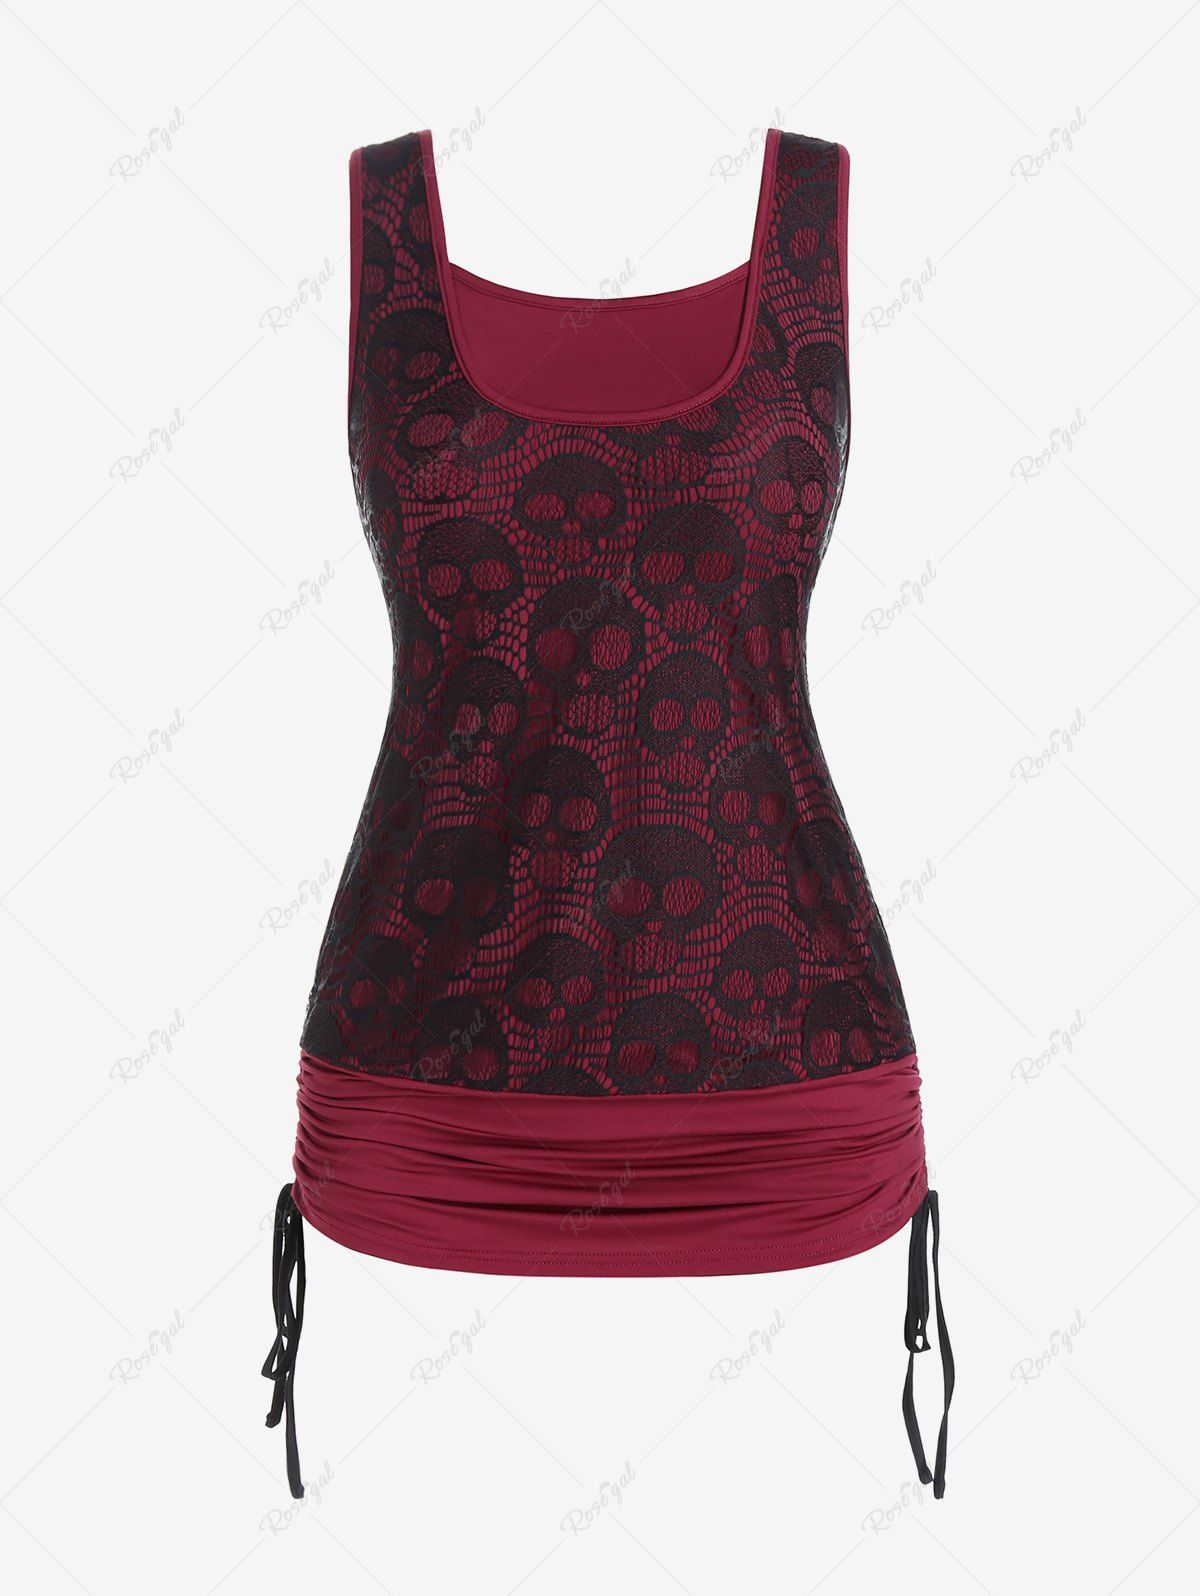 Unique Skull Lace Panel Cinched Gothic Tank Top  